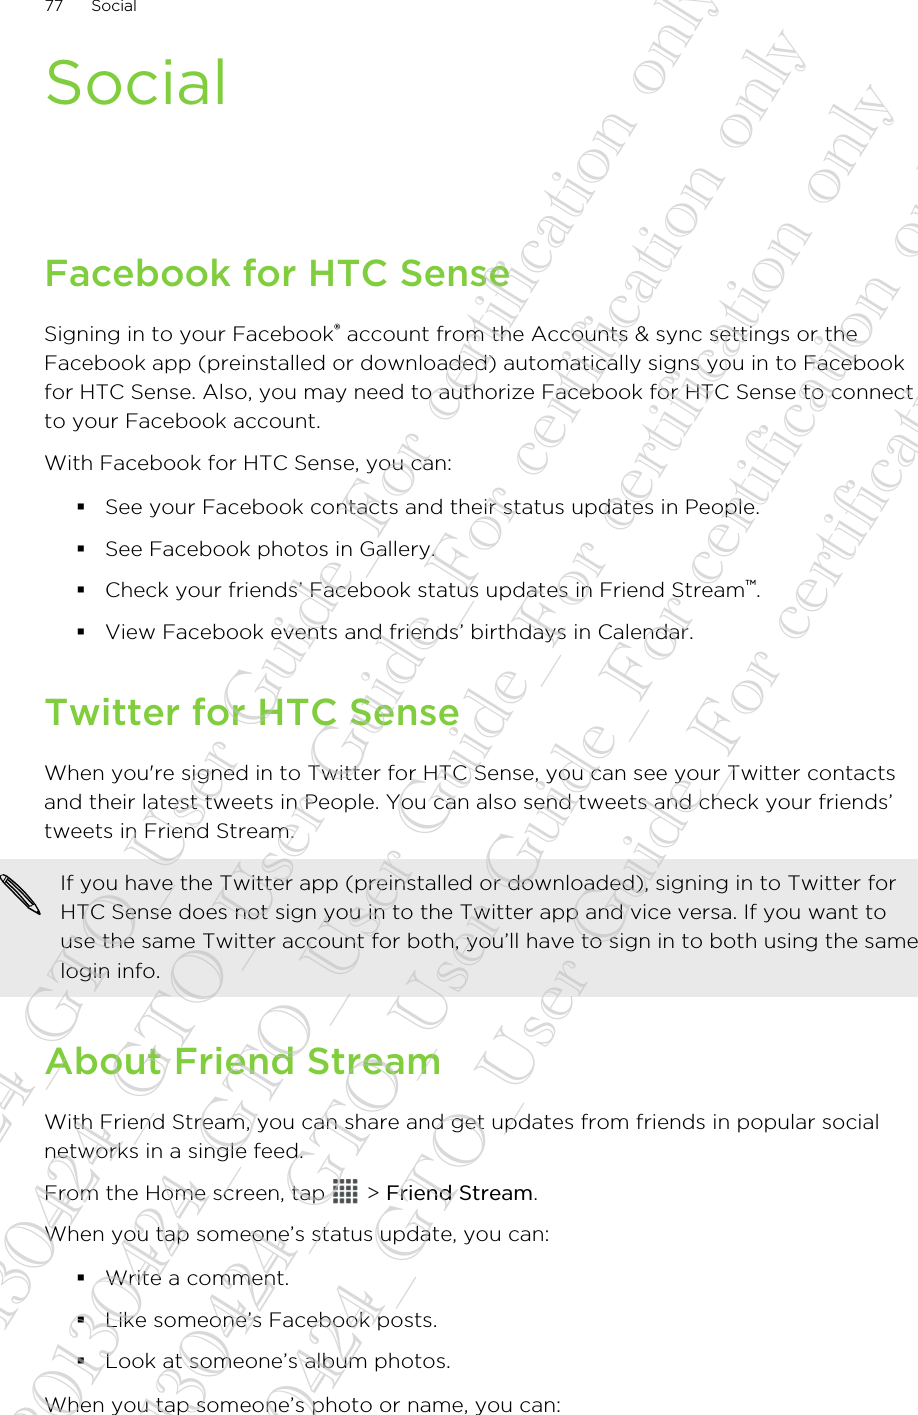 SocialFacebook for HTC SenseSigning in to your Facebook® account from the Accounts &amp; sync settings or theFacebook app (preinstalled or downloaded) automatically signs you in to Facebookfor HTC Sense. Also, you may need to authorize Facebook for HTC Sense to connectto your Facebook account.With Facebook for HTC Sense, you can:§See your Facebook contacts and their status updates in People.§See Facebook photos in Gallery.§Check your friends’ Facebook status updates in Friend Stream™.§View Facebook events and friends’ birthdays in Calendar.Twitter for HTC SenseWhen you&apos;re signed in to Twitter for HTC Sense, you can see your Twitter contactsand their latest tweets in People. You can also send tweets and check your friends’tweets in Friend Stream.If you have the Twitter app (preinstalled or downloaded), signing in to Twitter forHTC Sense does not sign you in to the Twitter app and vice versa. If you want touse the same Twitter account for both, you’ll have to sign in to both using the samelogin info.About Friend StreamWith Friend Stream, you can share and get updates from friends in popular socialnetworks in a single feed.From the Home screen, tap   &gt; Friend Stream.When you tap someone’s status update, you can:§Write a comment.§Like someone’s Facebook posts.§Look at someone’s album photos.When you tap someone’s photo or name, you can:77 Social20130424_GTO_User Guide_For certification only 20130424_GTO_User Guide_For certification only 20130424_GTO_User Guide_For certification only 20130424_GTO_User Guide_For certification only 20130424_GTO_User Guide_For certification only